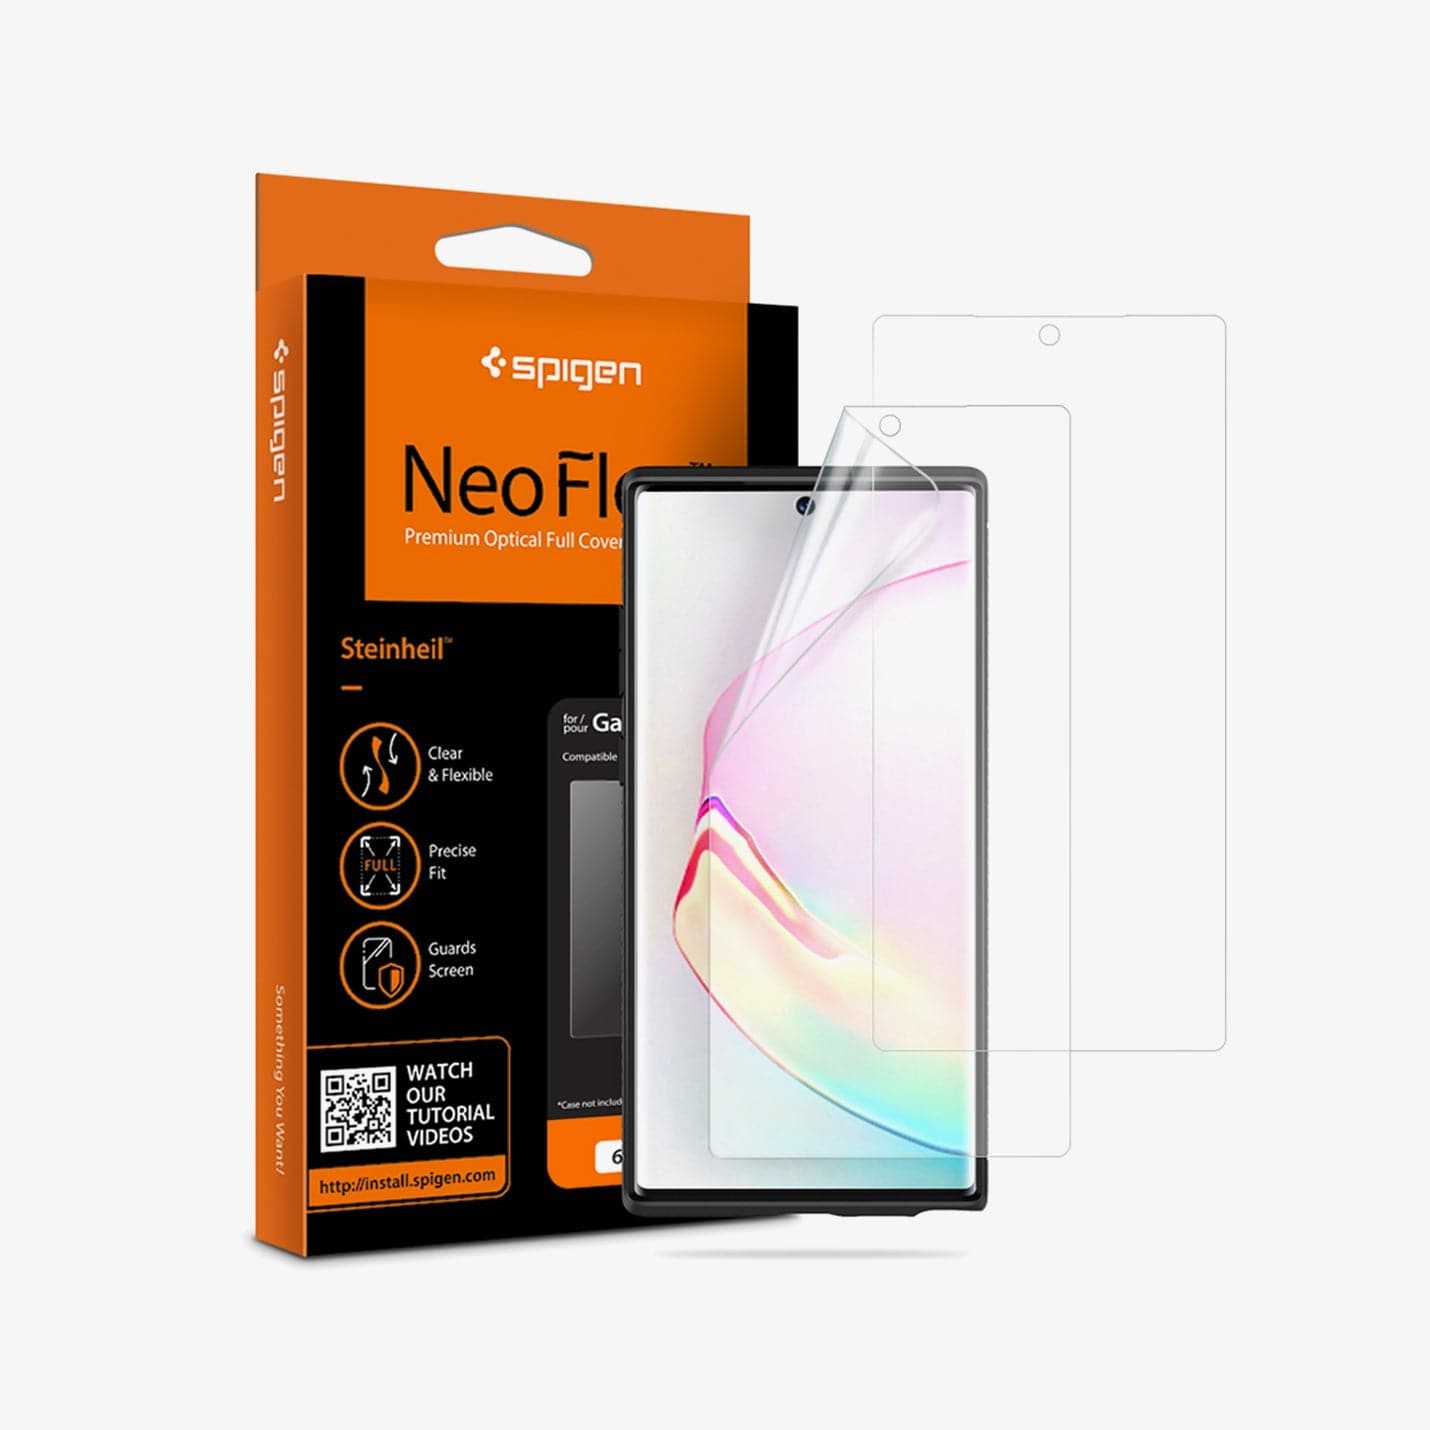 627FL27292 - Galaxy Note 10 Plus Neo Flex Screen Protector showing the device, two screen protectors and packaging